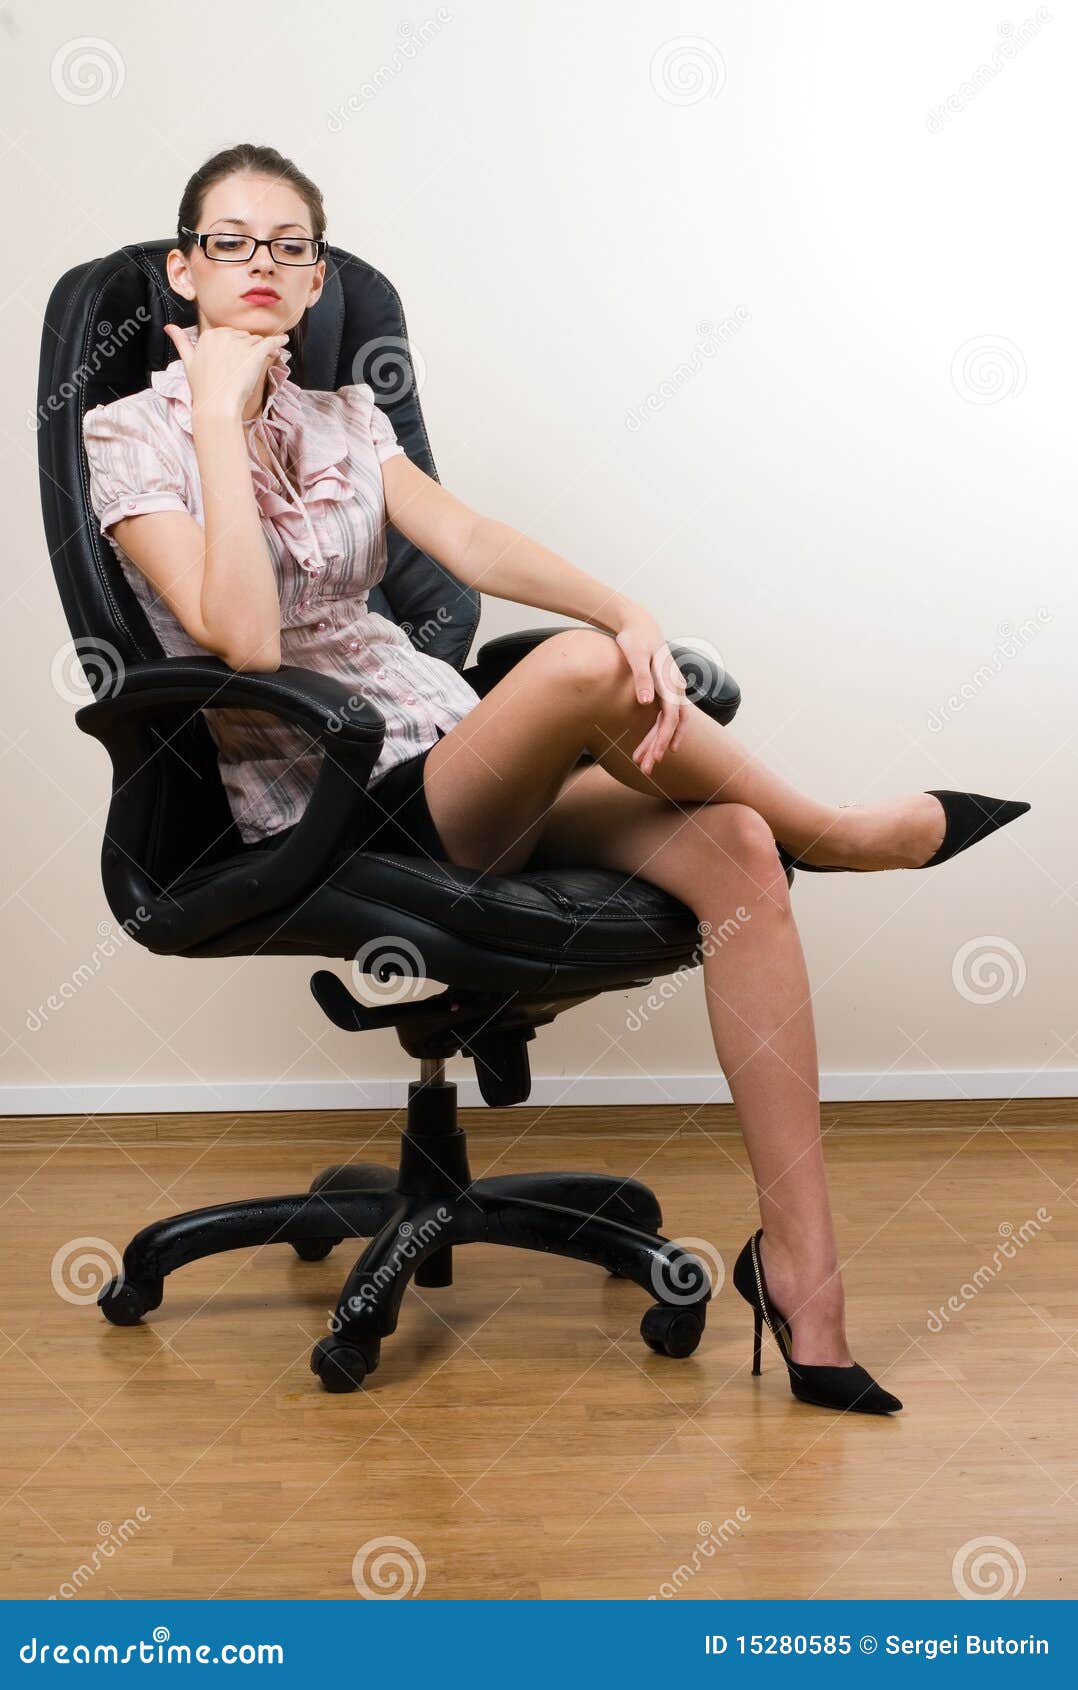 Lady-boss in office stock image. Image of desk, mail - 15280585